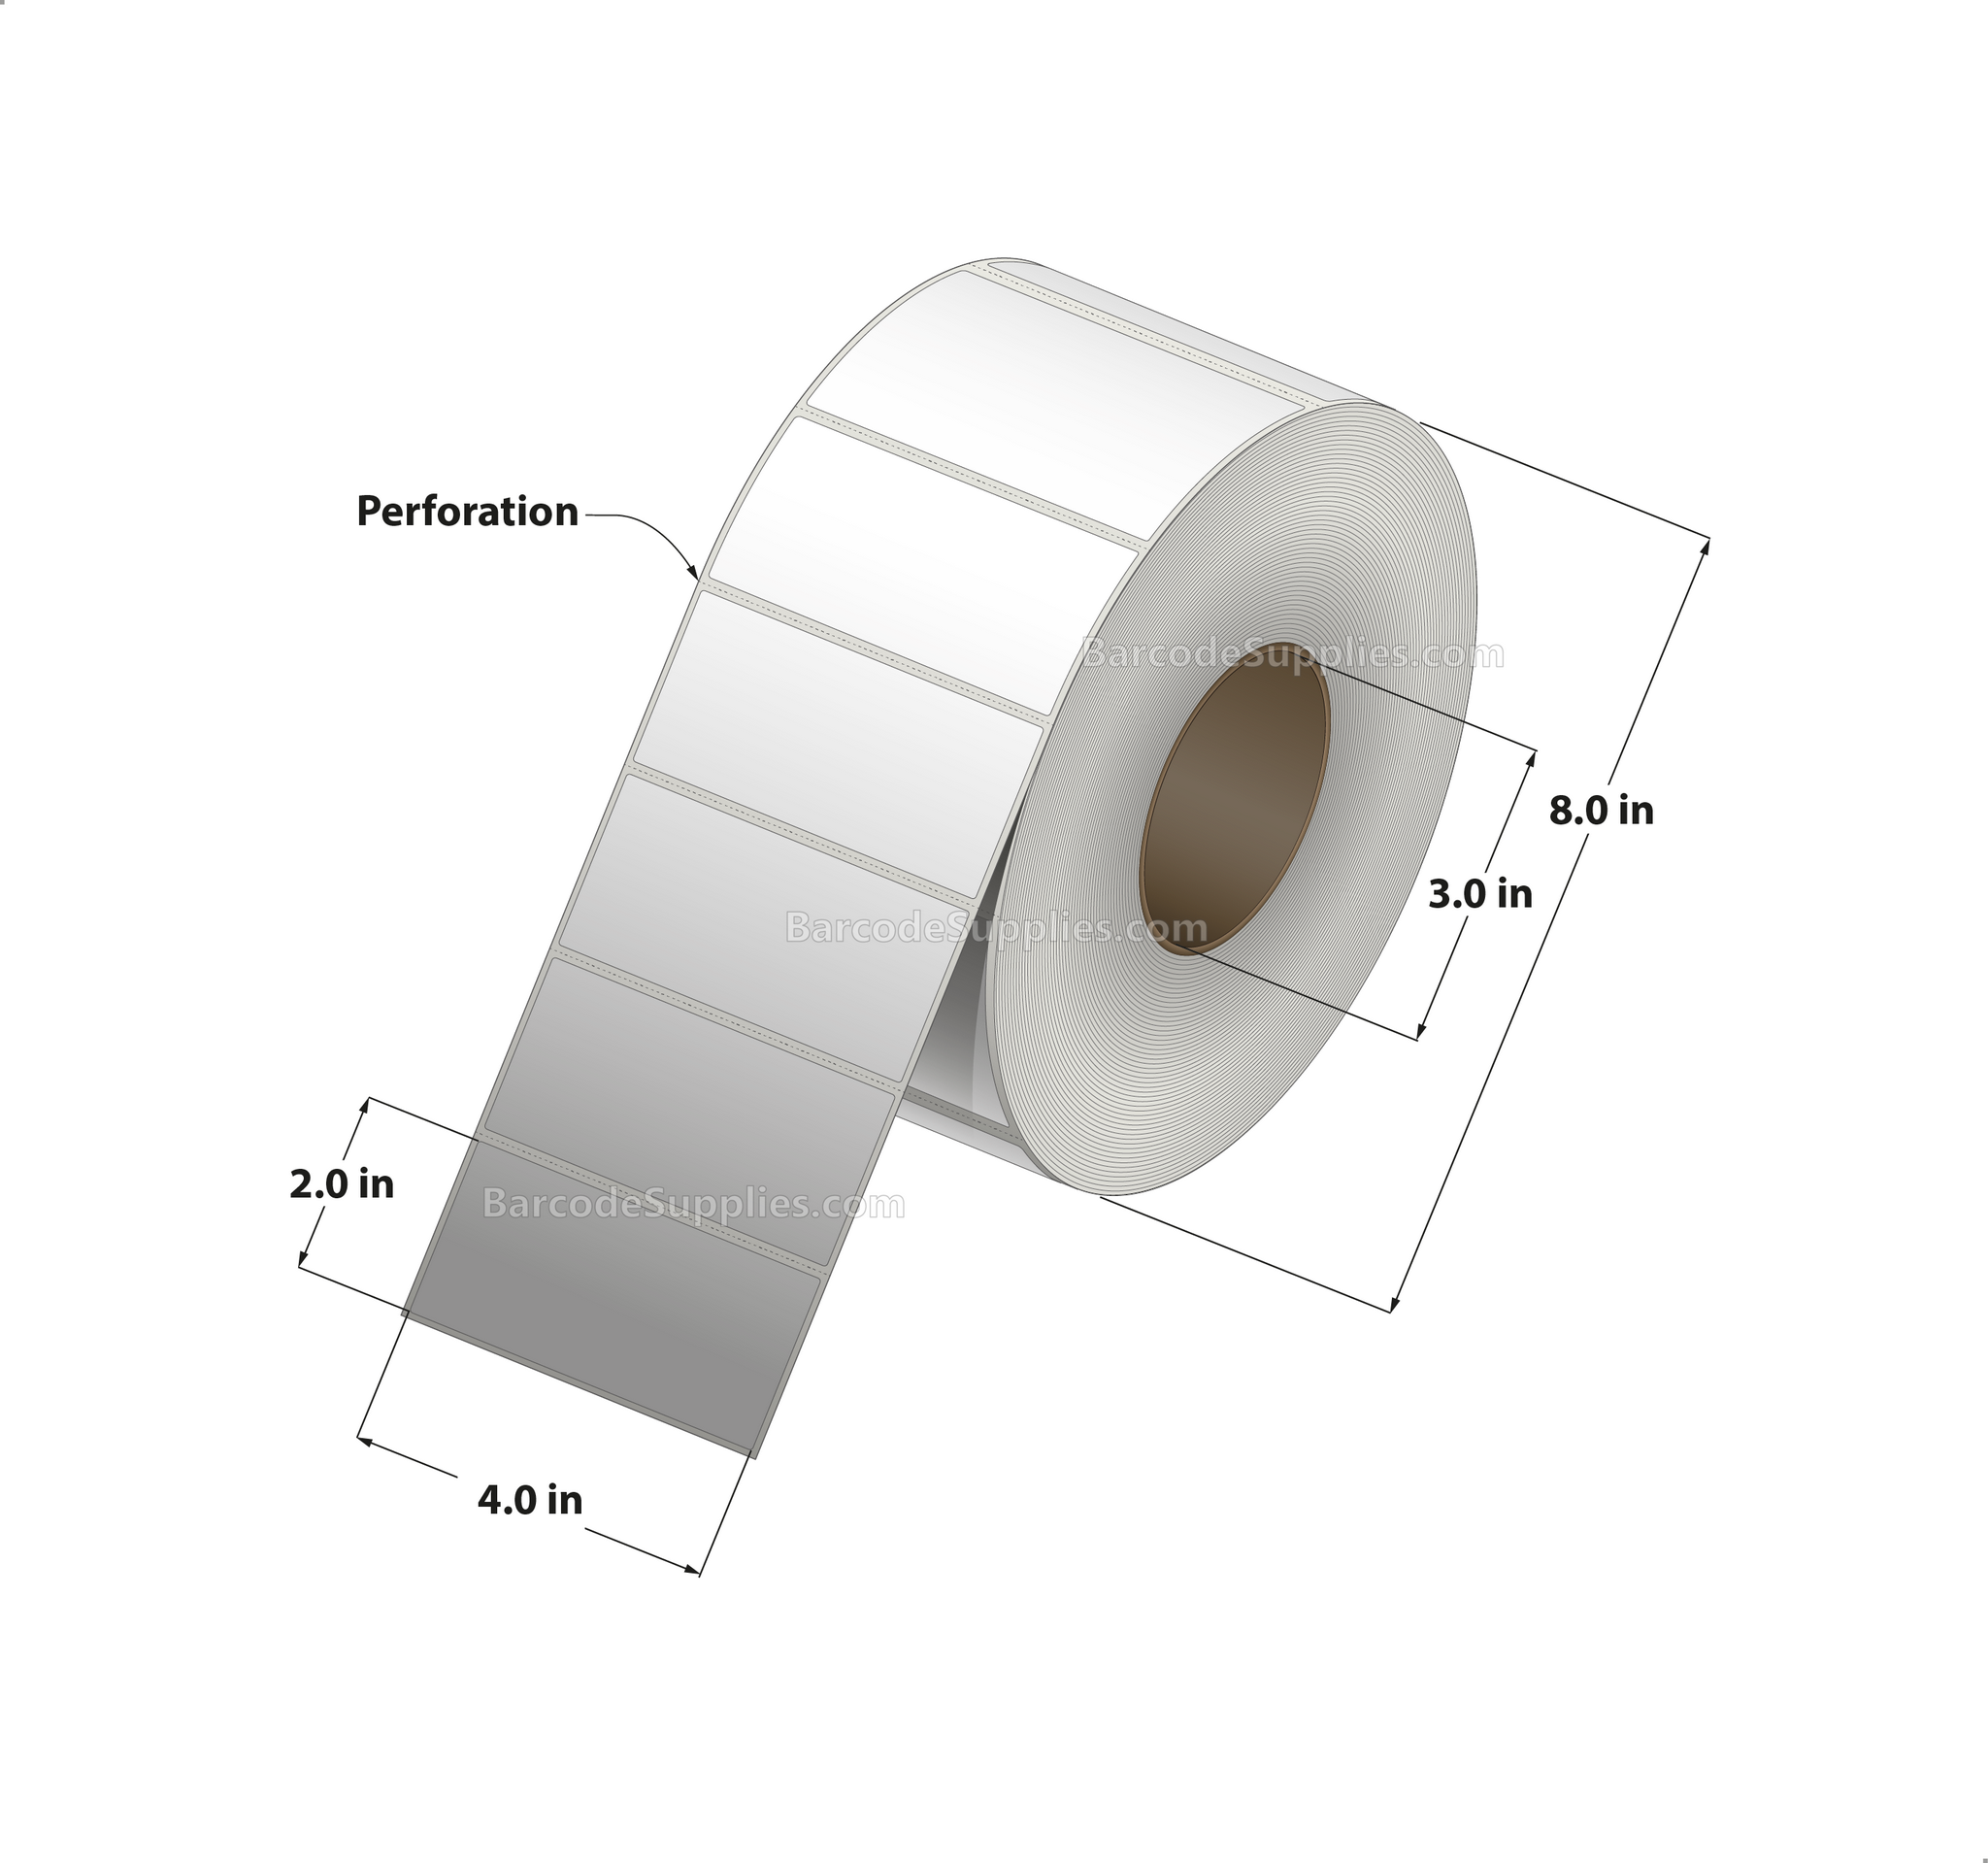 4 x 2 Thermal Transfer White Labels With Hammerlock (Very Aggressive) Adhesive - Perforated - 2900 Labels Per Roll - Carton Of 4 Rolls - 11600 Labels Total - MPN: RH-4-2-2900-3